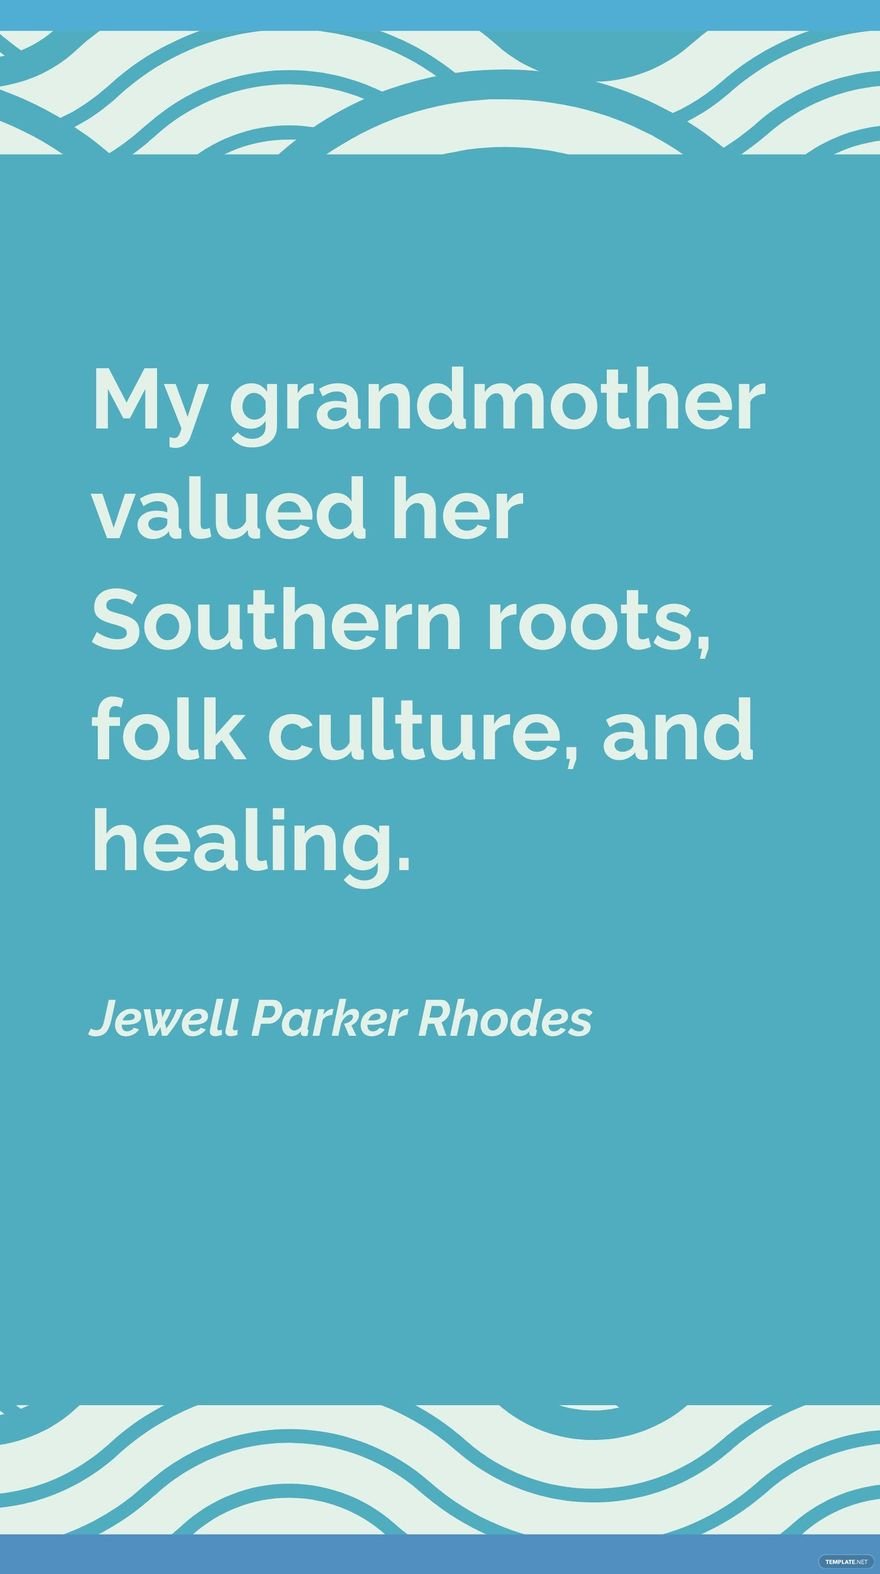 Free Jewell Parker Rhodes - My grandmother valued her Southern roots, folk culture, and healing. in JPG